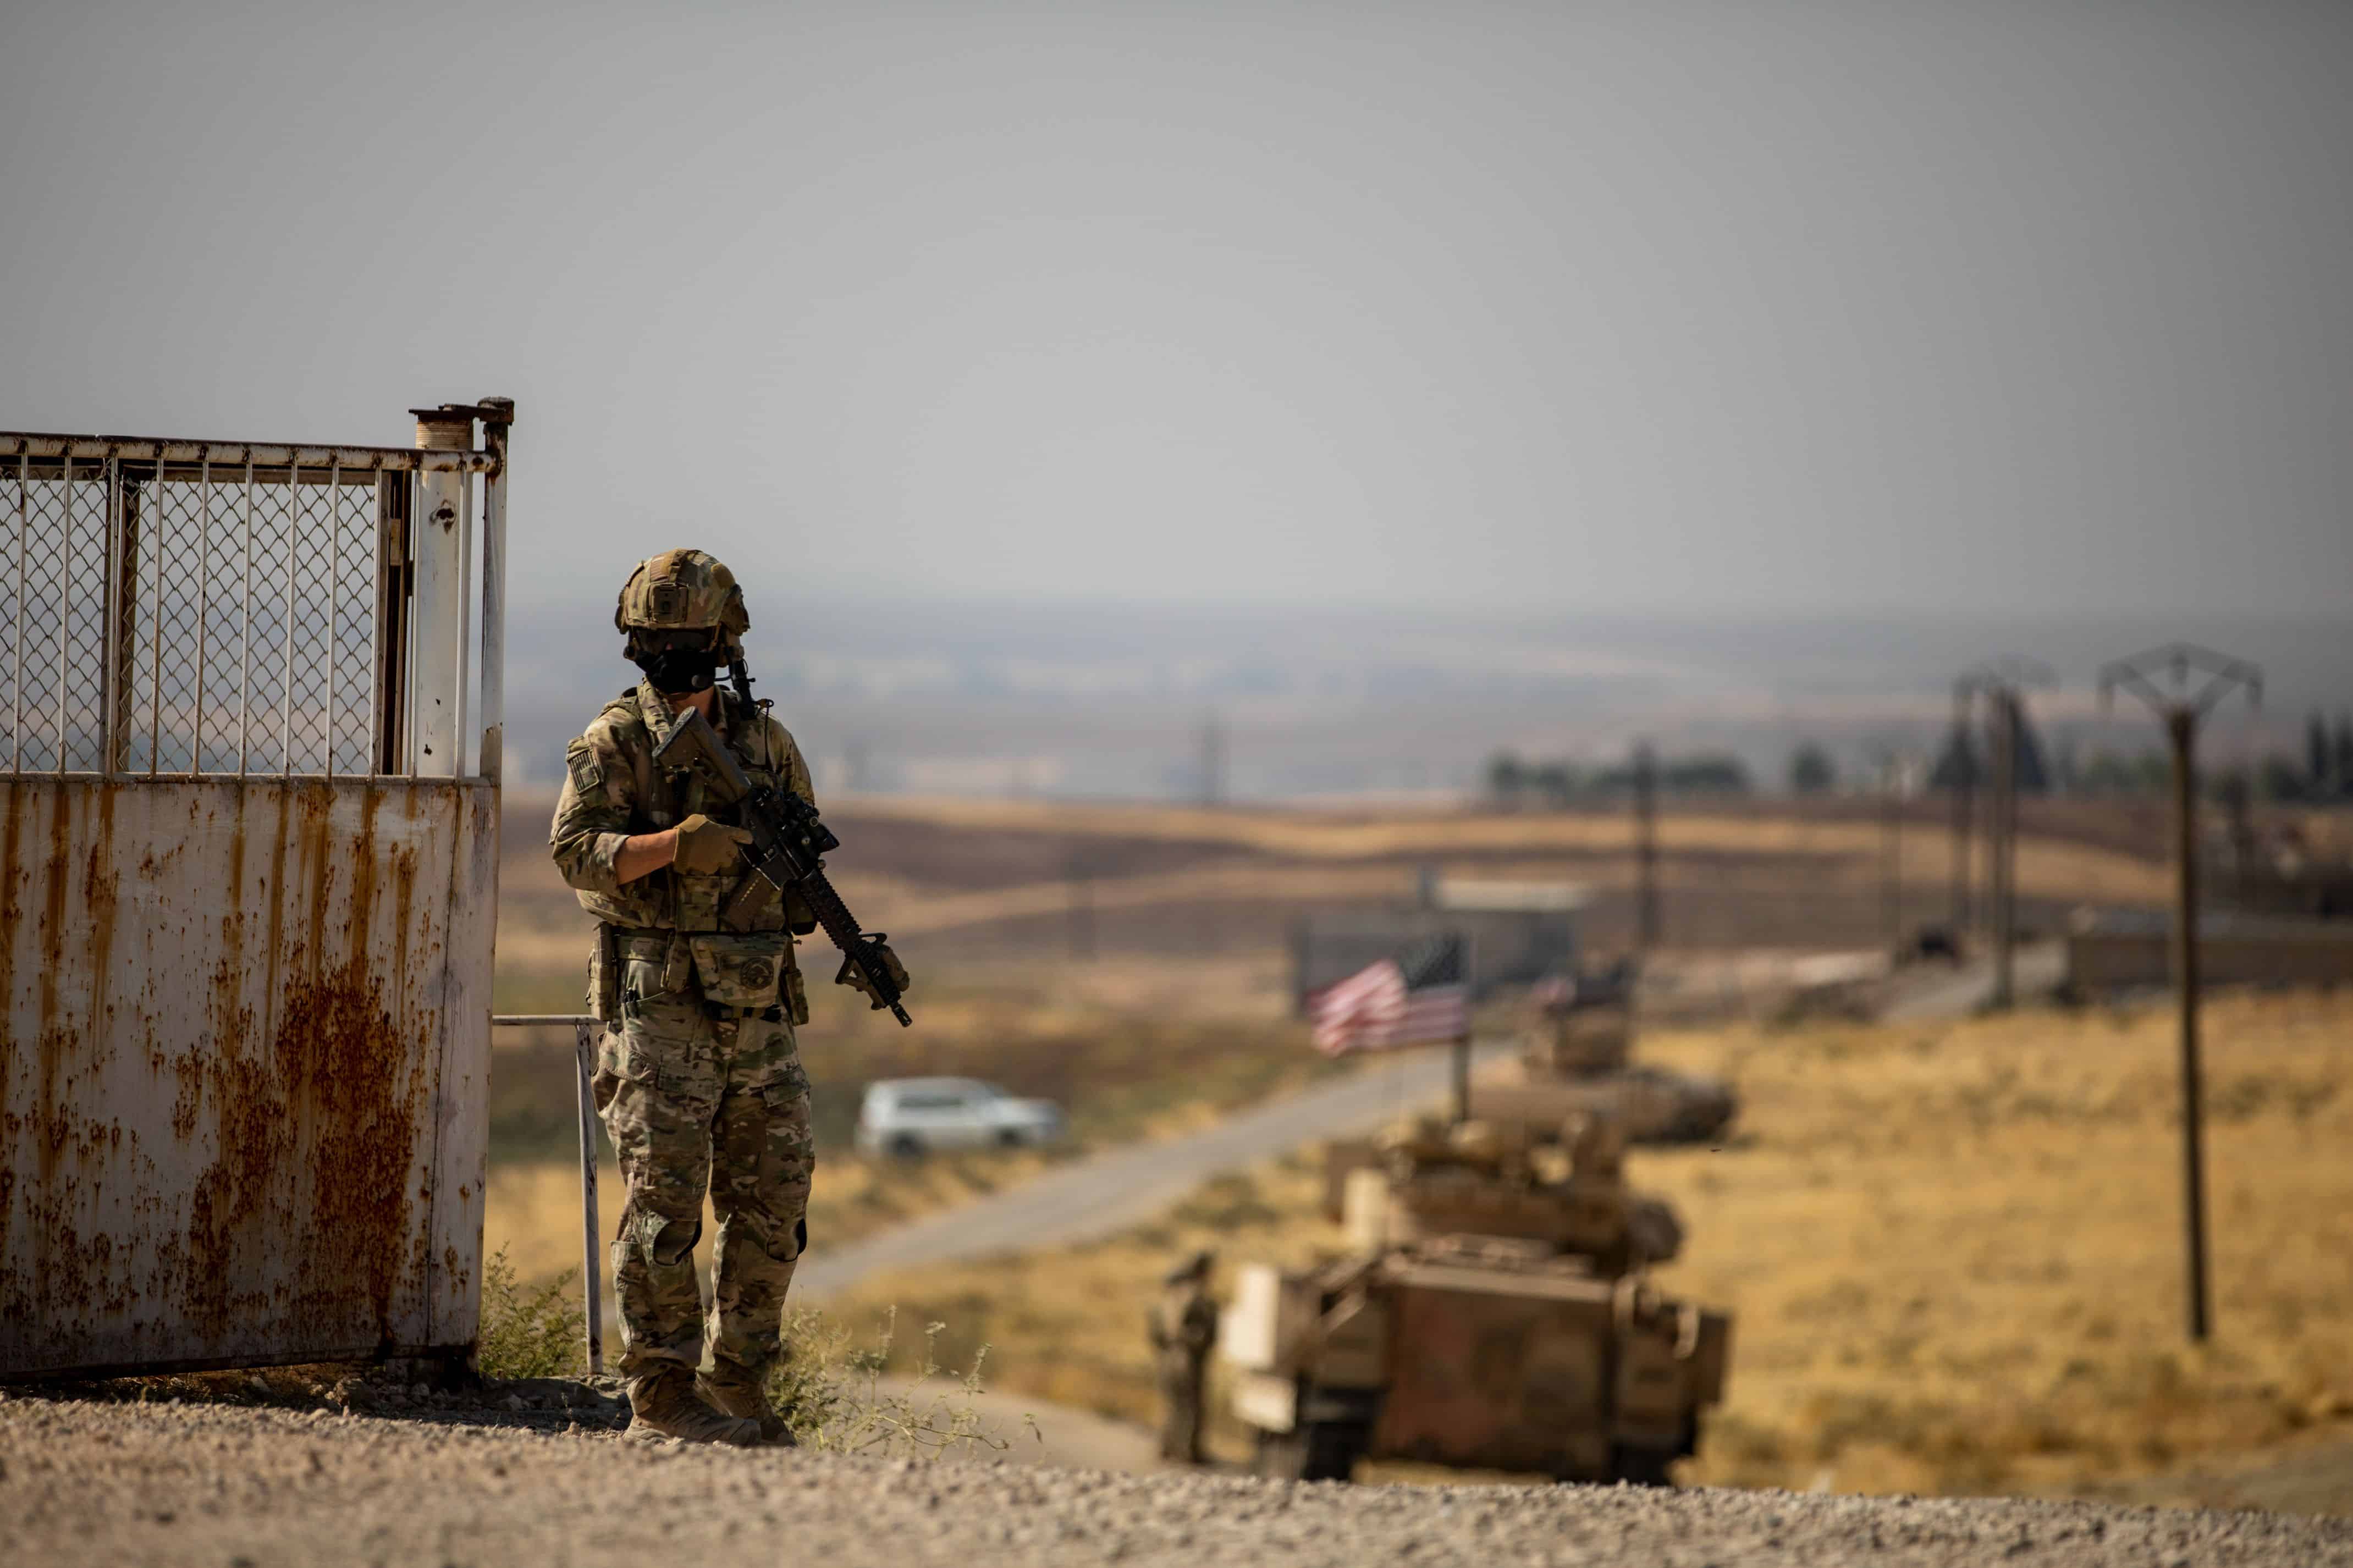 Sgt. Christian Cameron, from 1st Squadron, 73rd Cavalry Regiment, 2nd Brigade Combat Team, 82nd Airborne Division, pulls security for his team in Central Command (CENTCOM) area of responsibility, Oct. 27, 2020. The soldiers are in Syria to support Combined Joint Task Force-Operation Inherent Resolve (CJTF-OIR) mission. CJTF remains committed to working by, with and through our partners to ensure the enduring defeat of Daesh. (U.S. Army photo by Spc. Jensen Guillory)